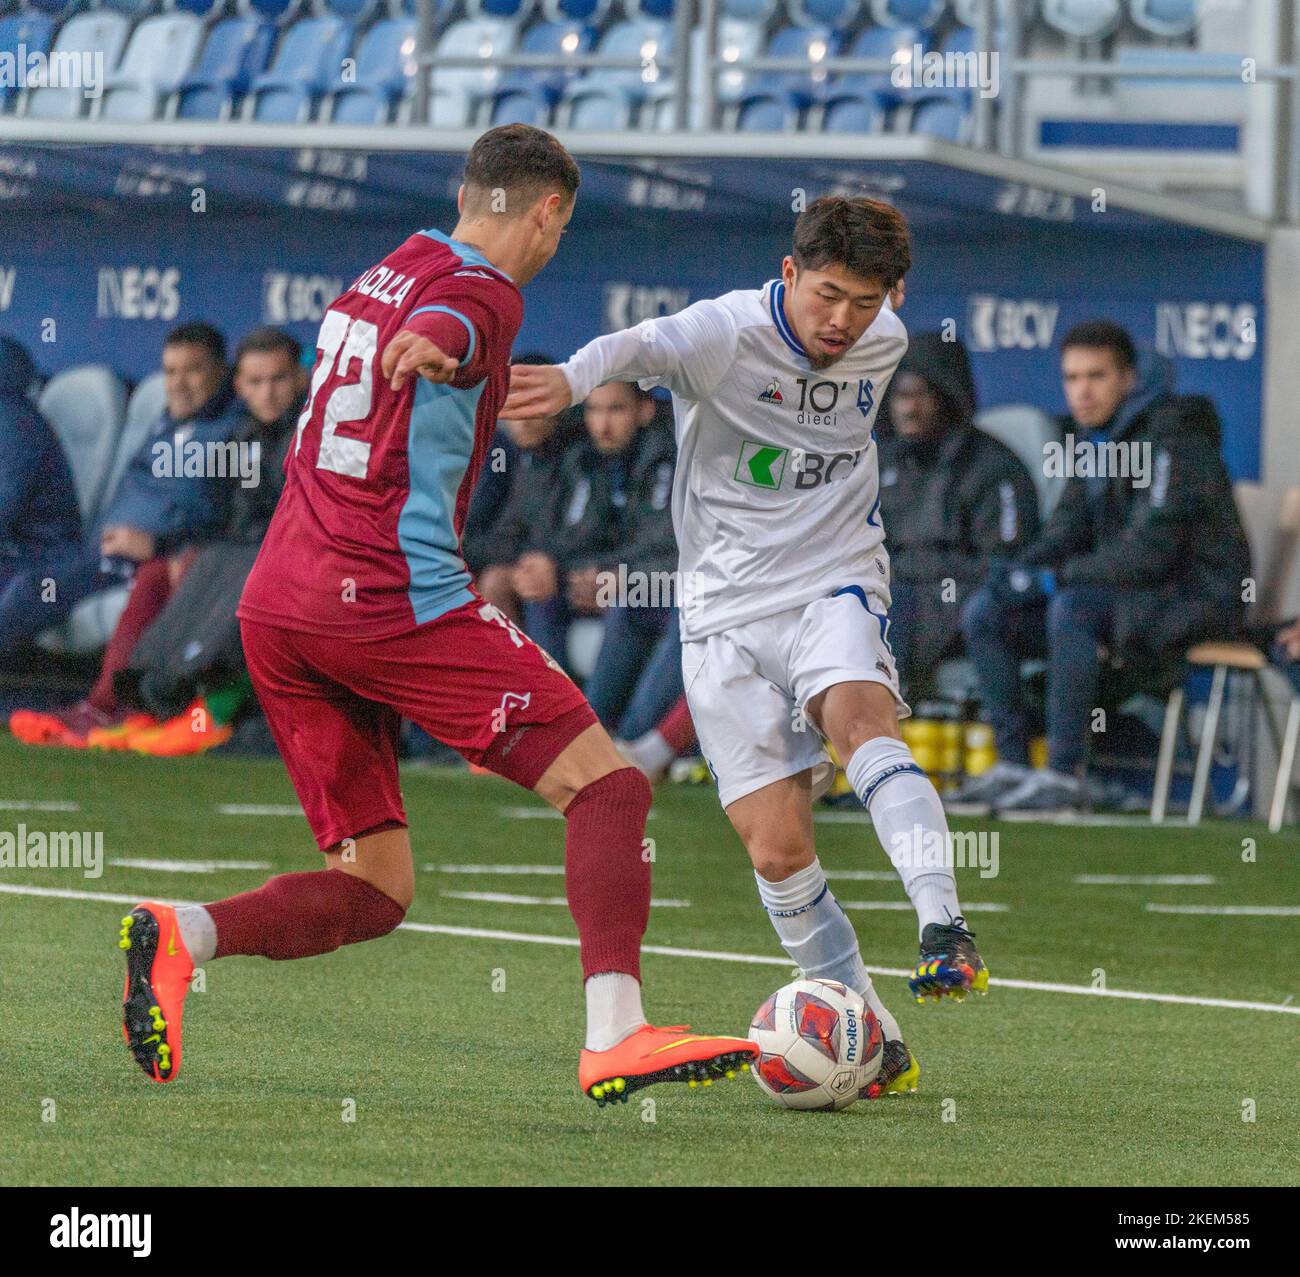 Lausanne Switzerland, 11/13/2022: Toichi Suzuki  (Middle) of Fc Lausanne-Sport (28) is in action during 16th day of the Challenge League 2022-2023. The Challenge League 2022-20223, took place at the Tuiliere stadium in Lausanne between Fc Lausanne-Sport and AC Bellinzona. Credit: Eric Dubost/Alamy Live News Stock Photo